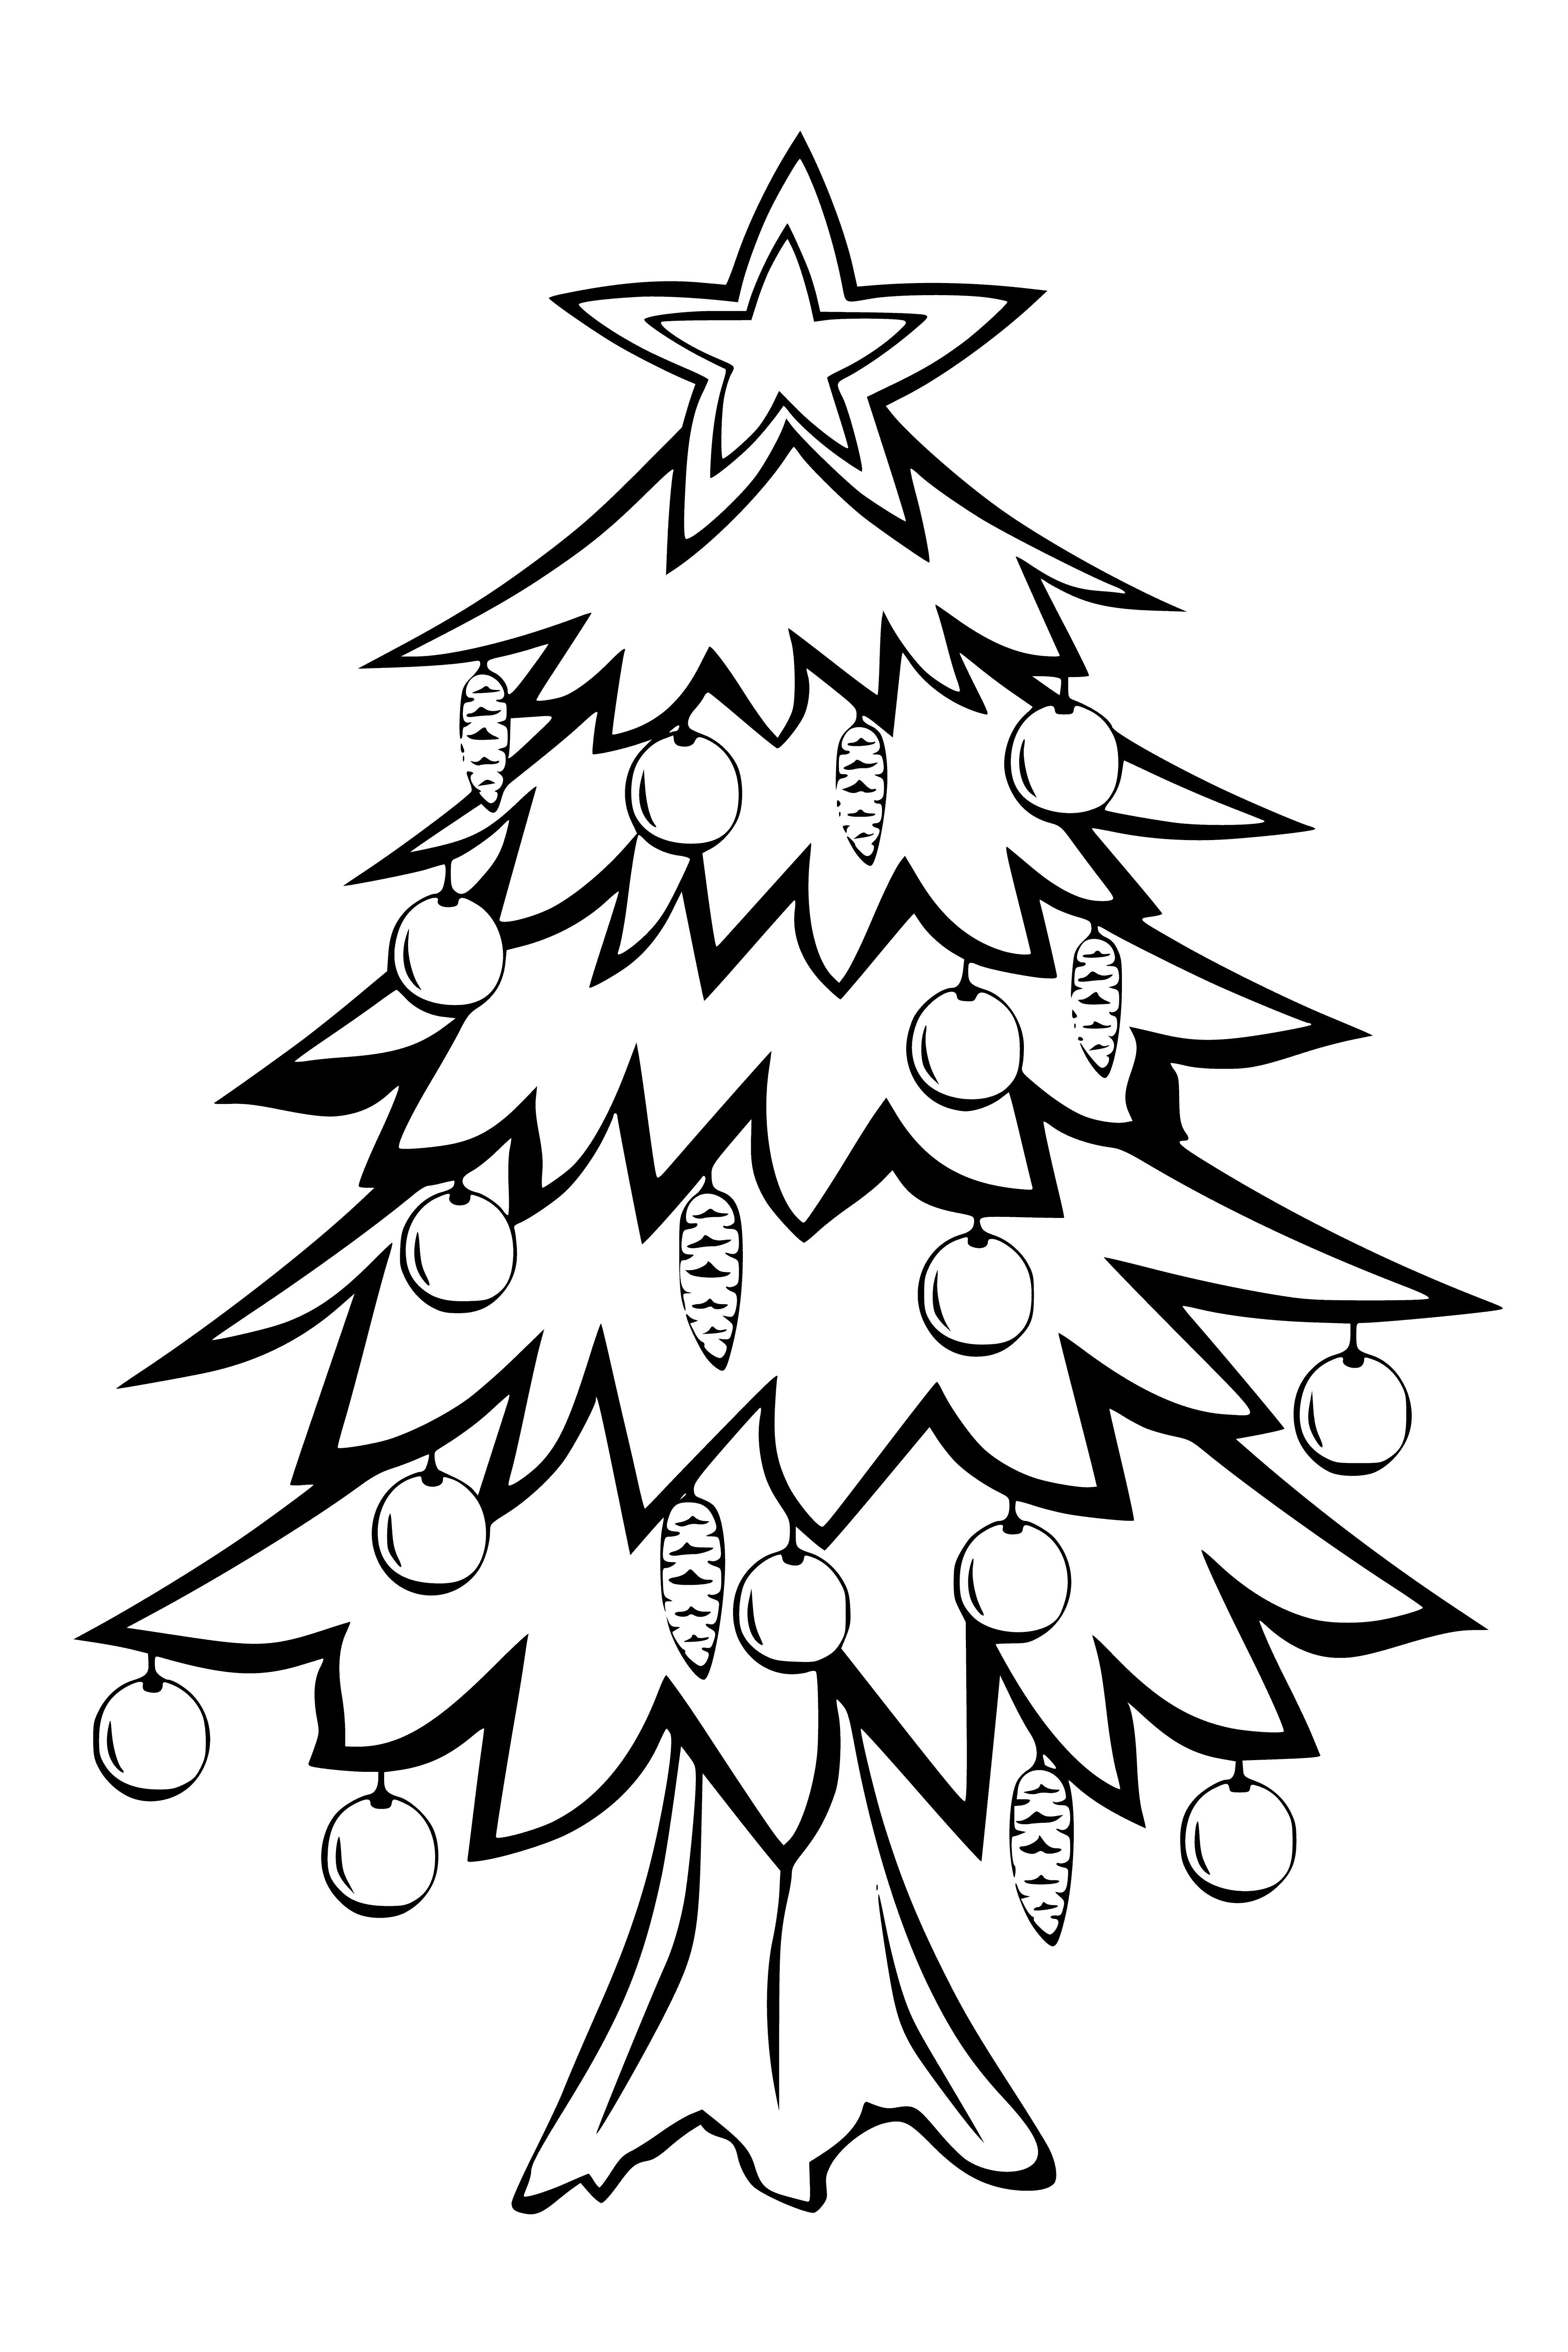 coloring page: Decorated Christmas tree in a pot, filled with lights and ornaments.